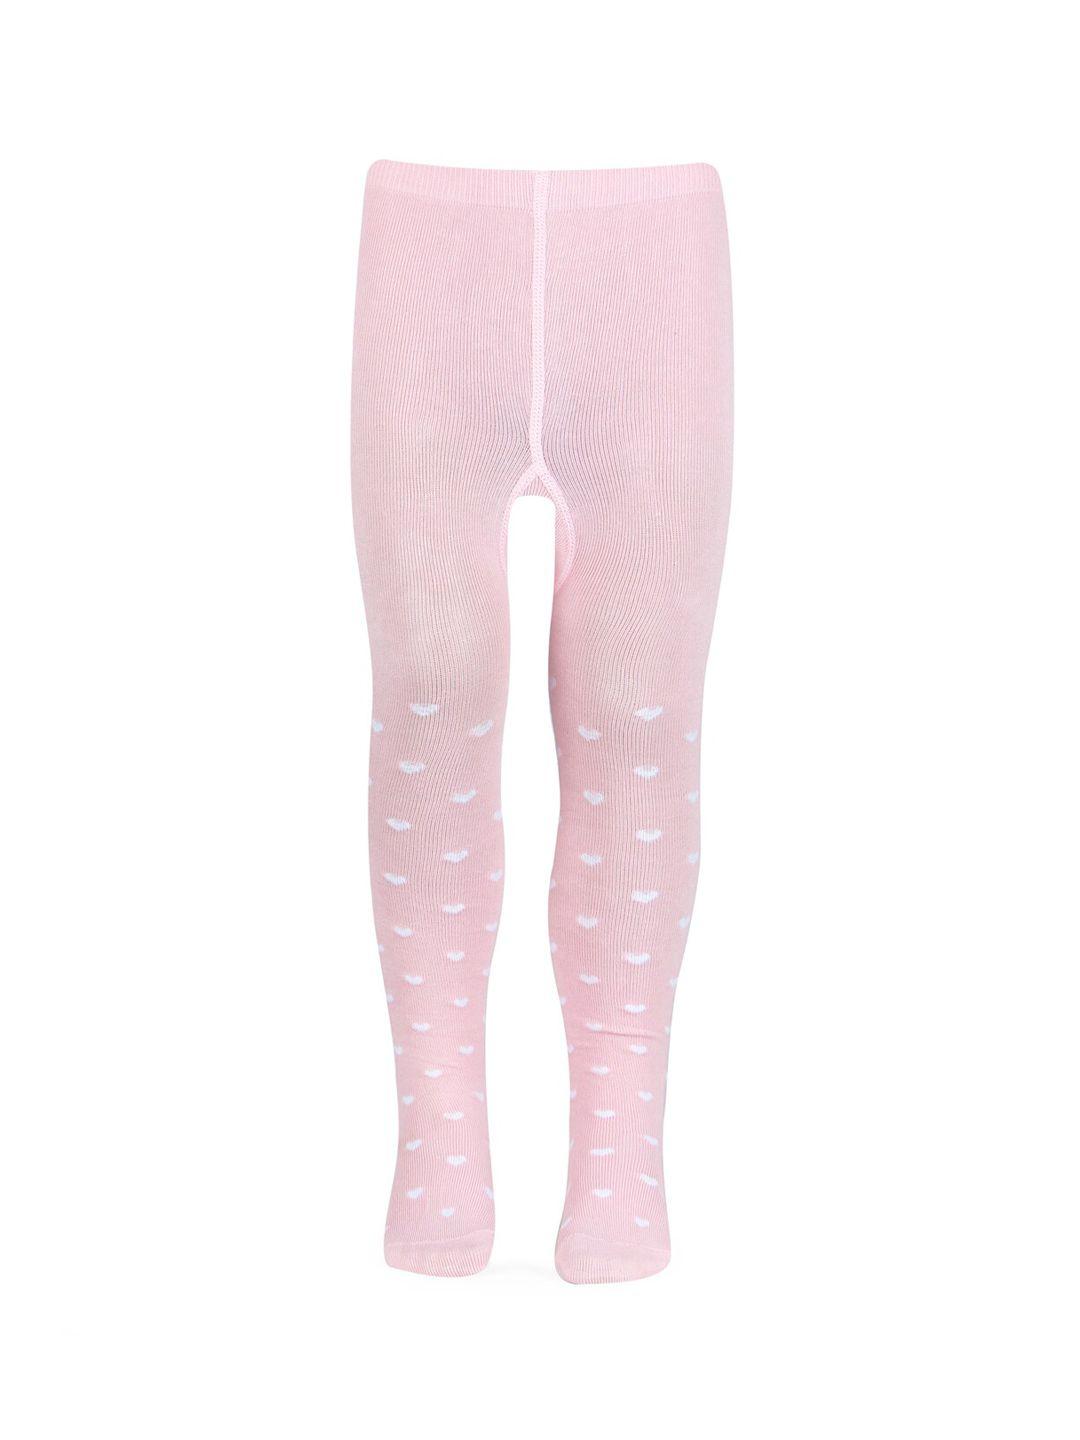 bonjour infants printed cotton tights with attached stockings